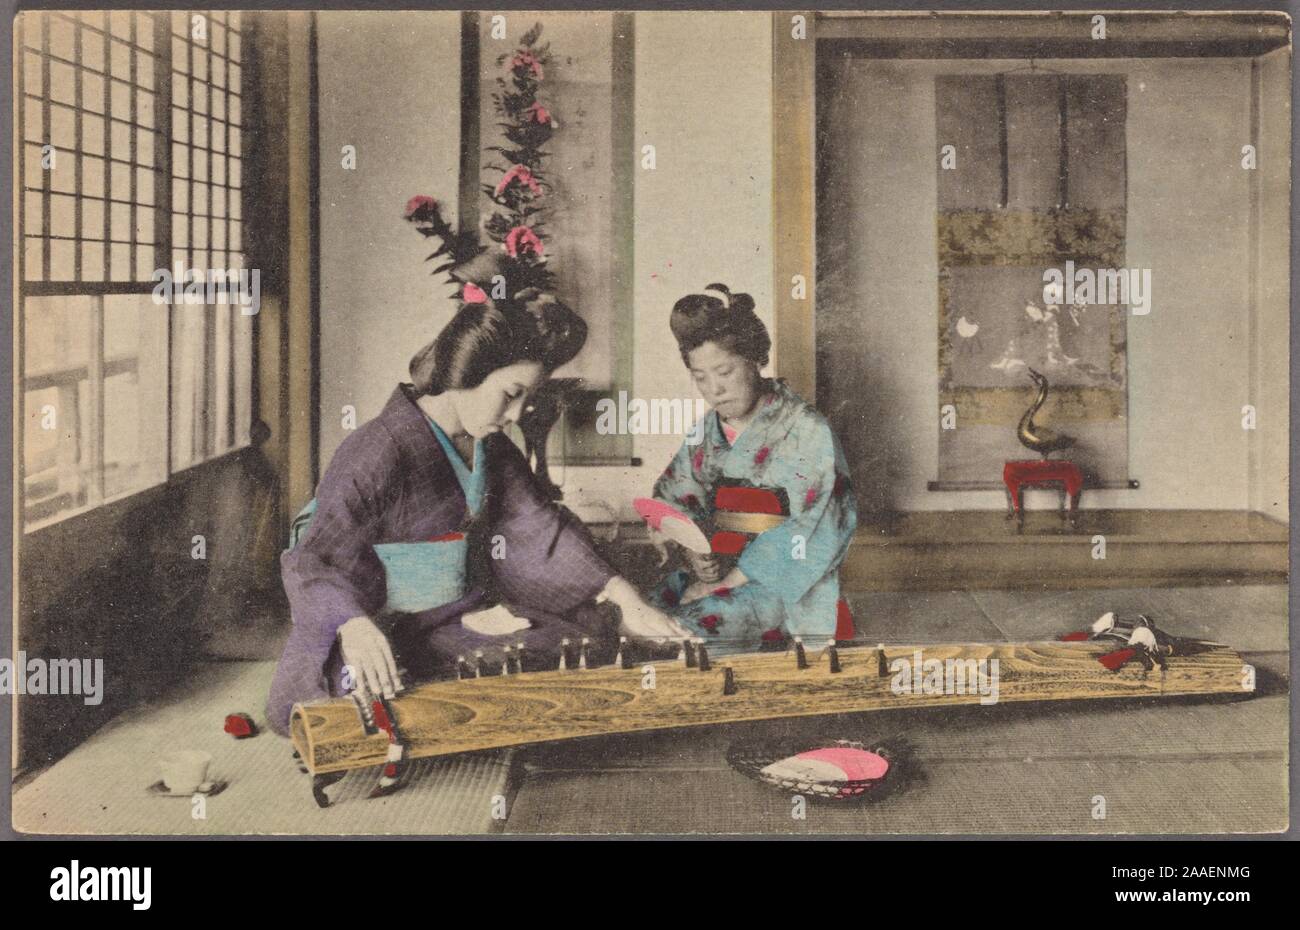 Illustrated postcard of two Japanese women wearing traditional kimono, kneeling on the floor playing the traditional Japanese stringed musical instrument called koto, Japan, 1920. From the New York Public Library. () Stock Photo